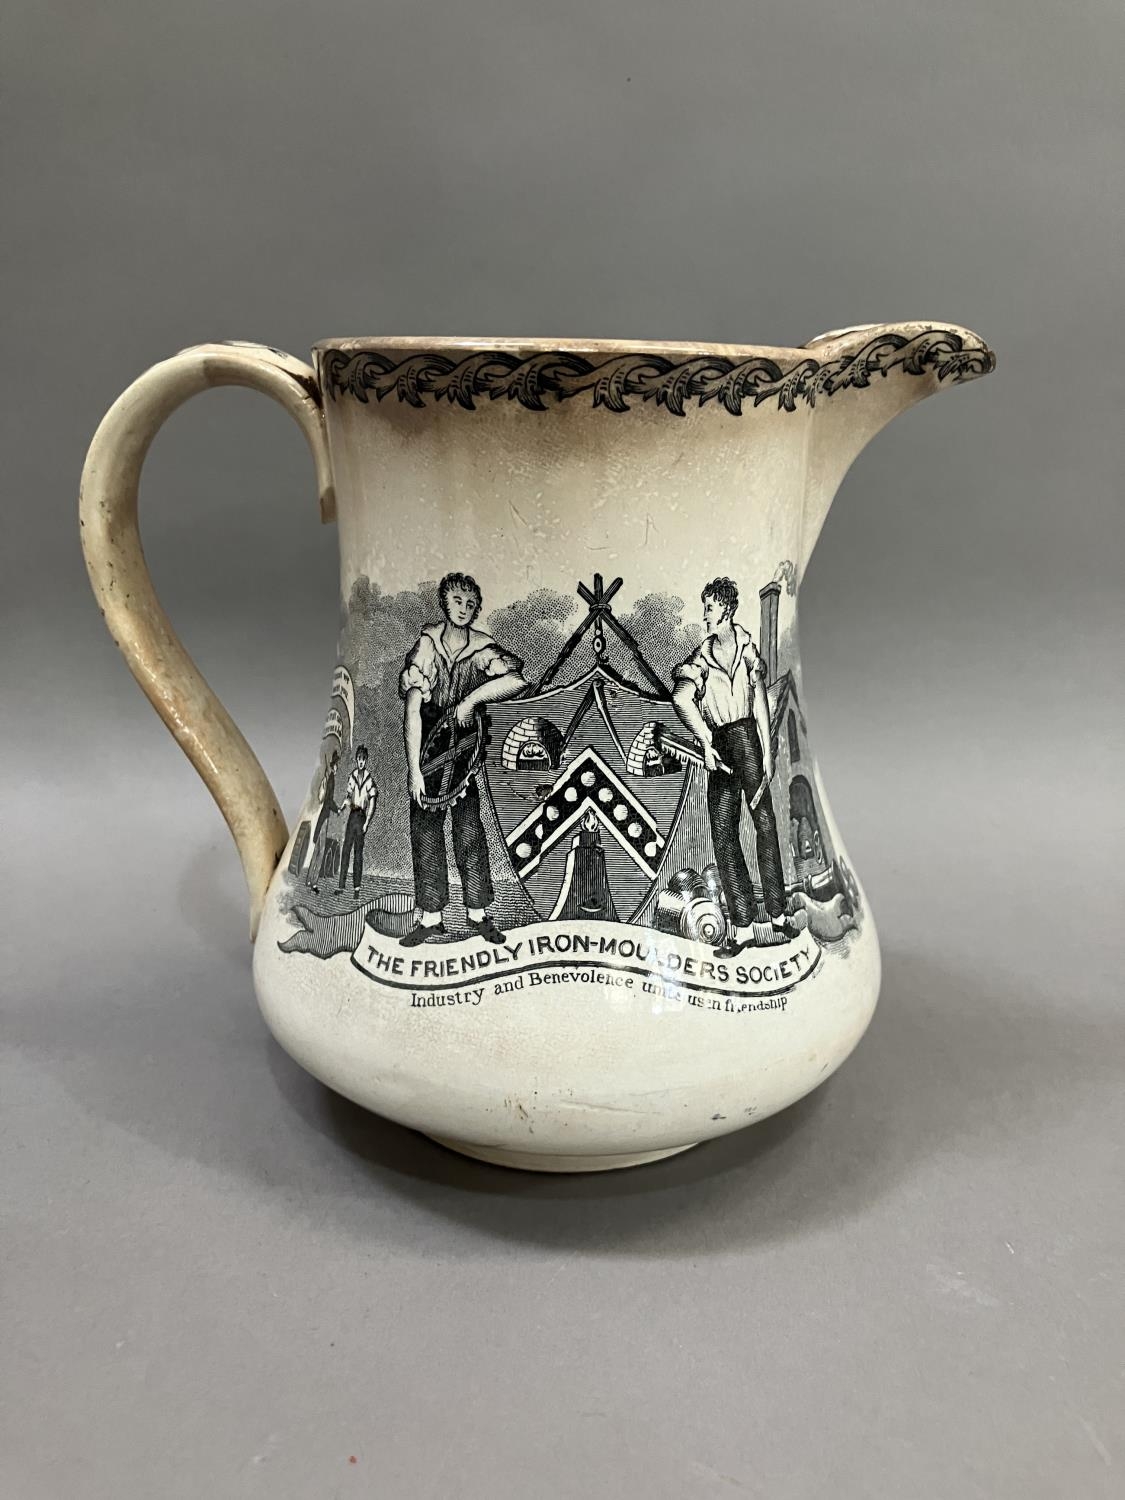 A 19th century pottery jug transfer printed with the Friendly Iron Moulders Society, figures and